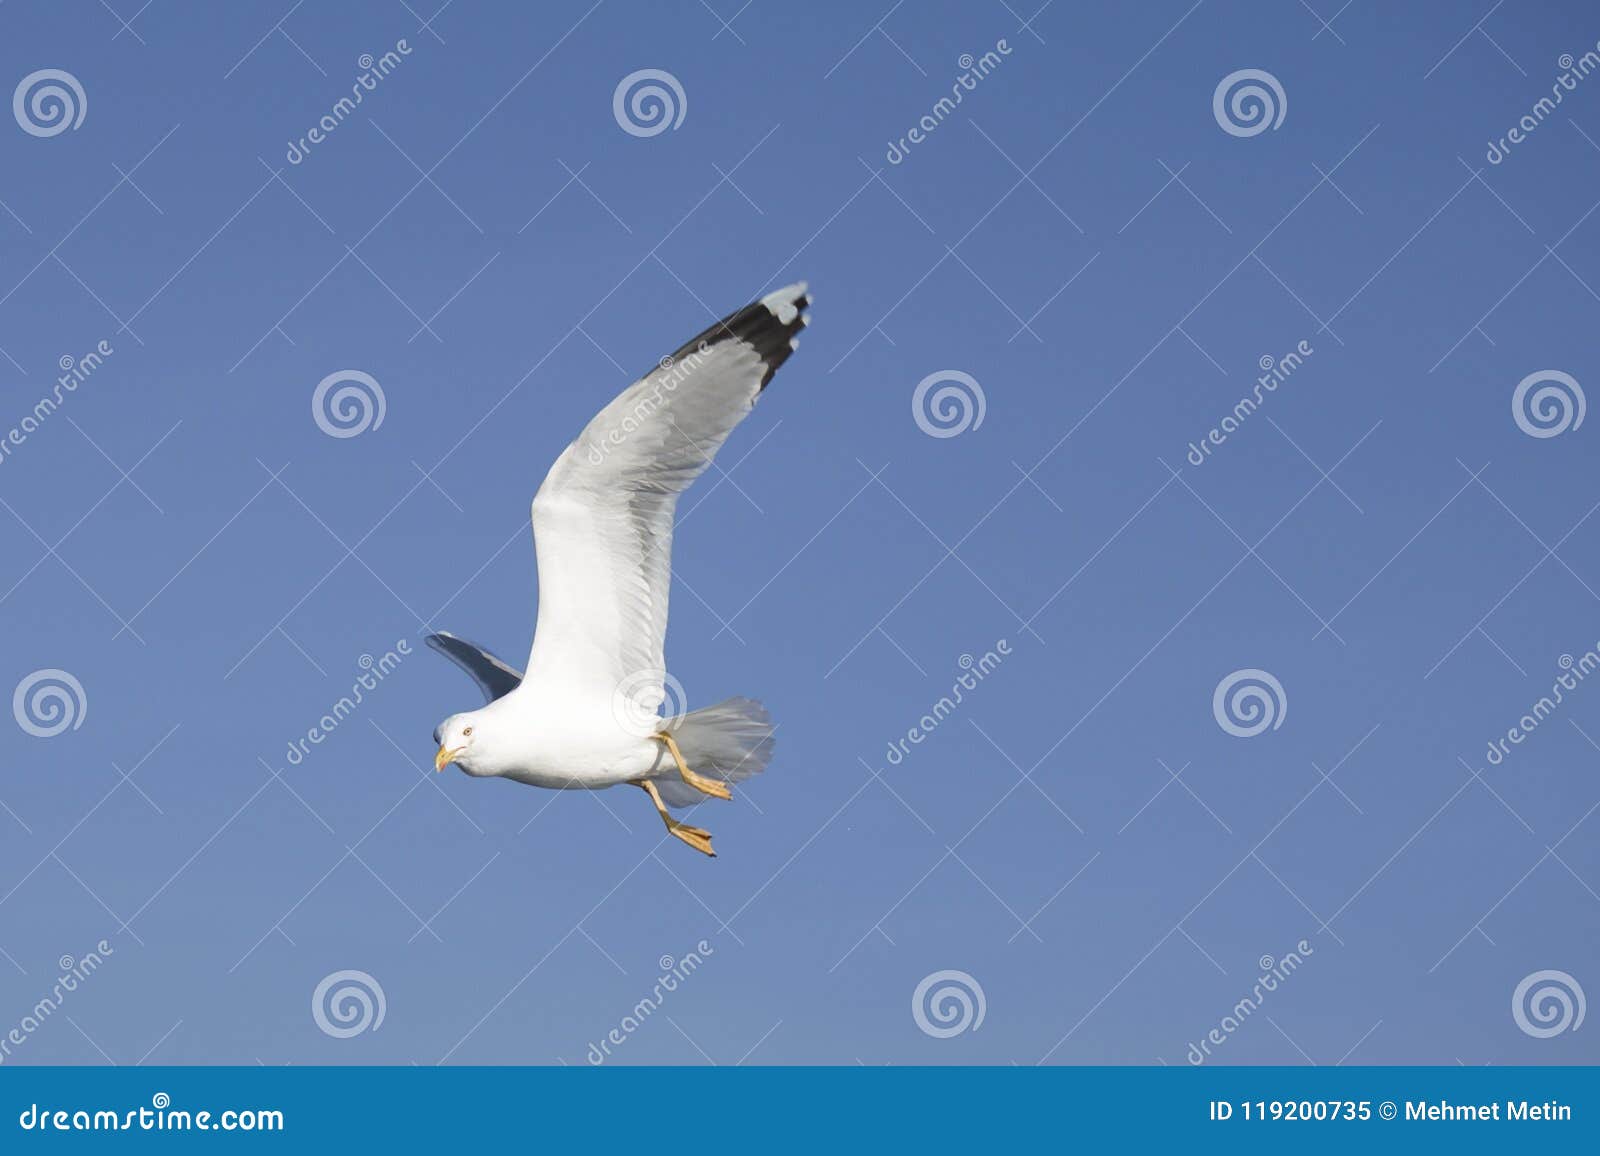 the free flying seagull